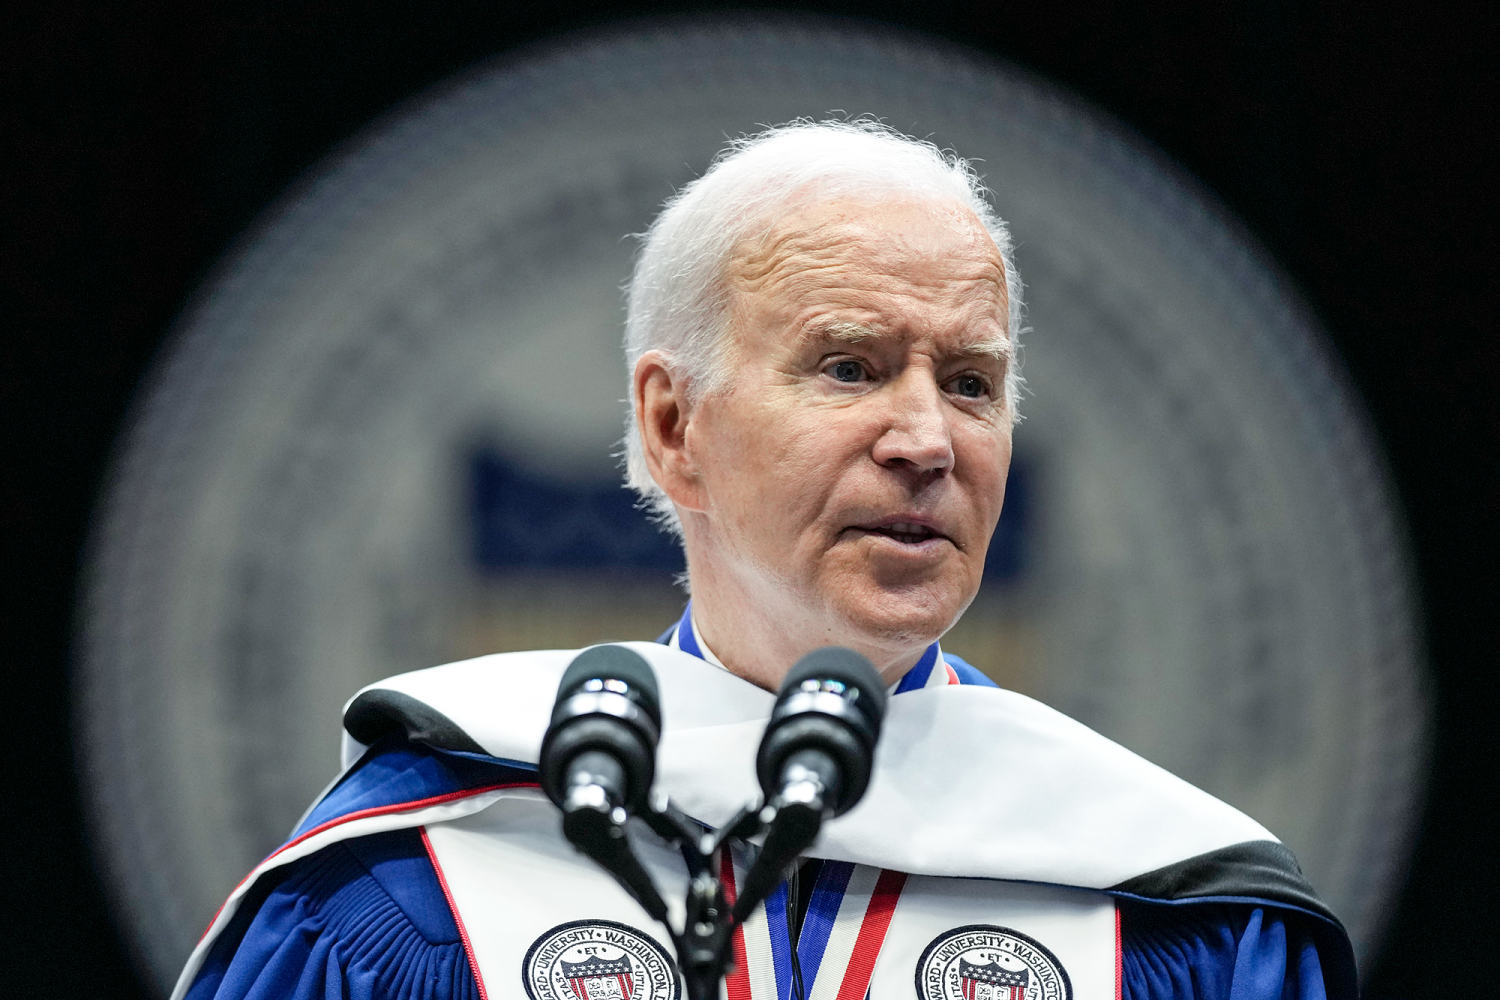 Biden officials will have a minimal presence at college graduations as campuses erupt in protests